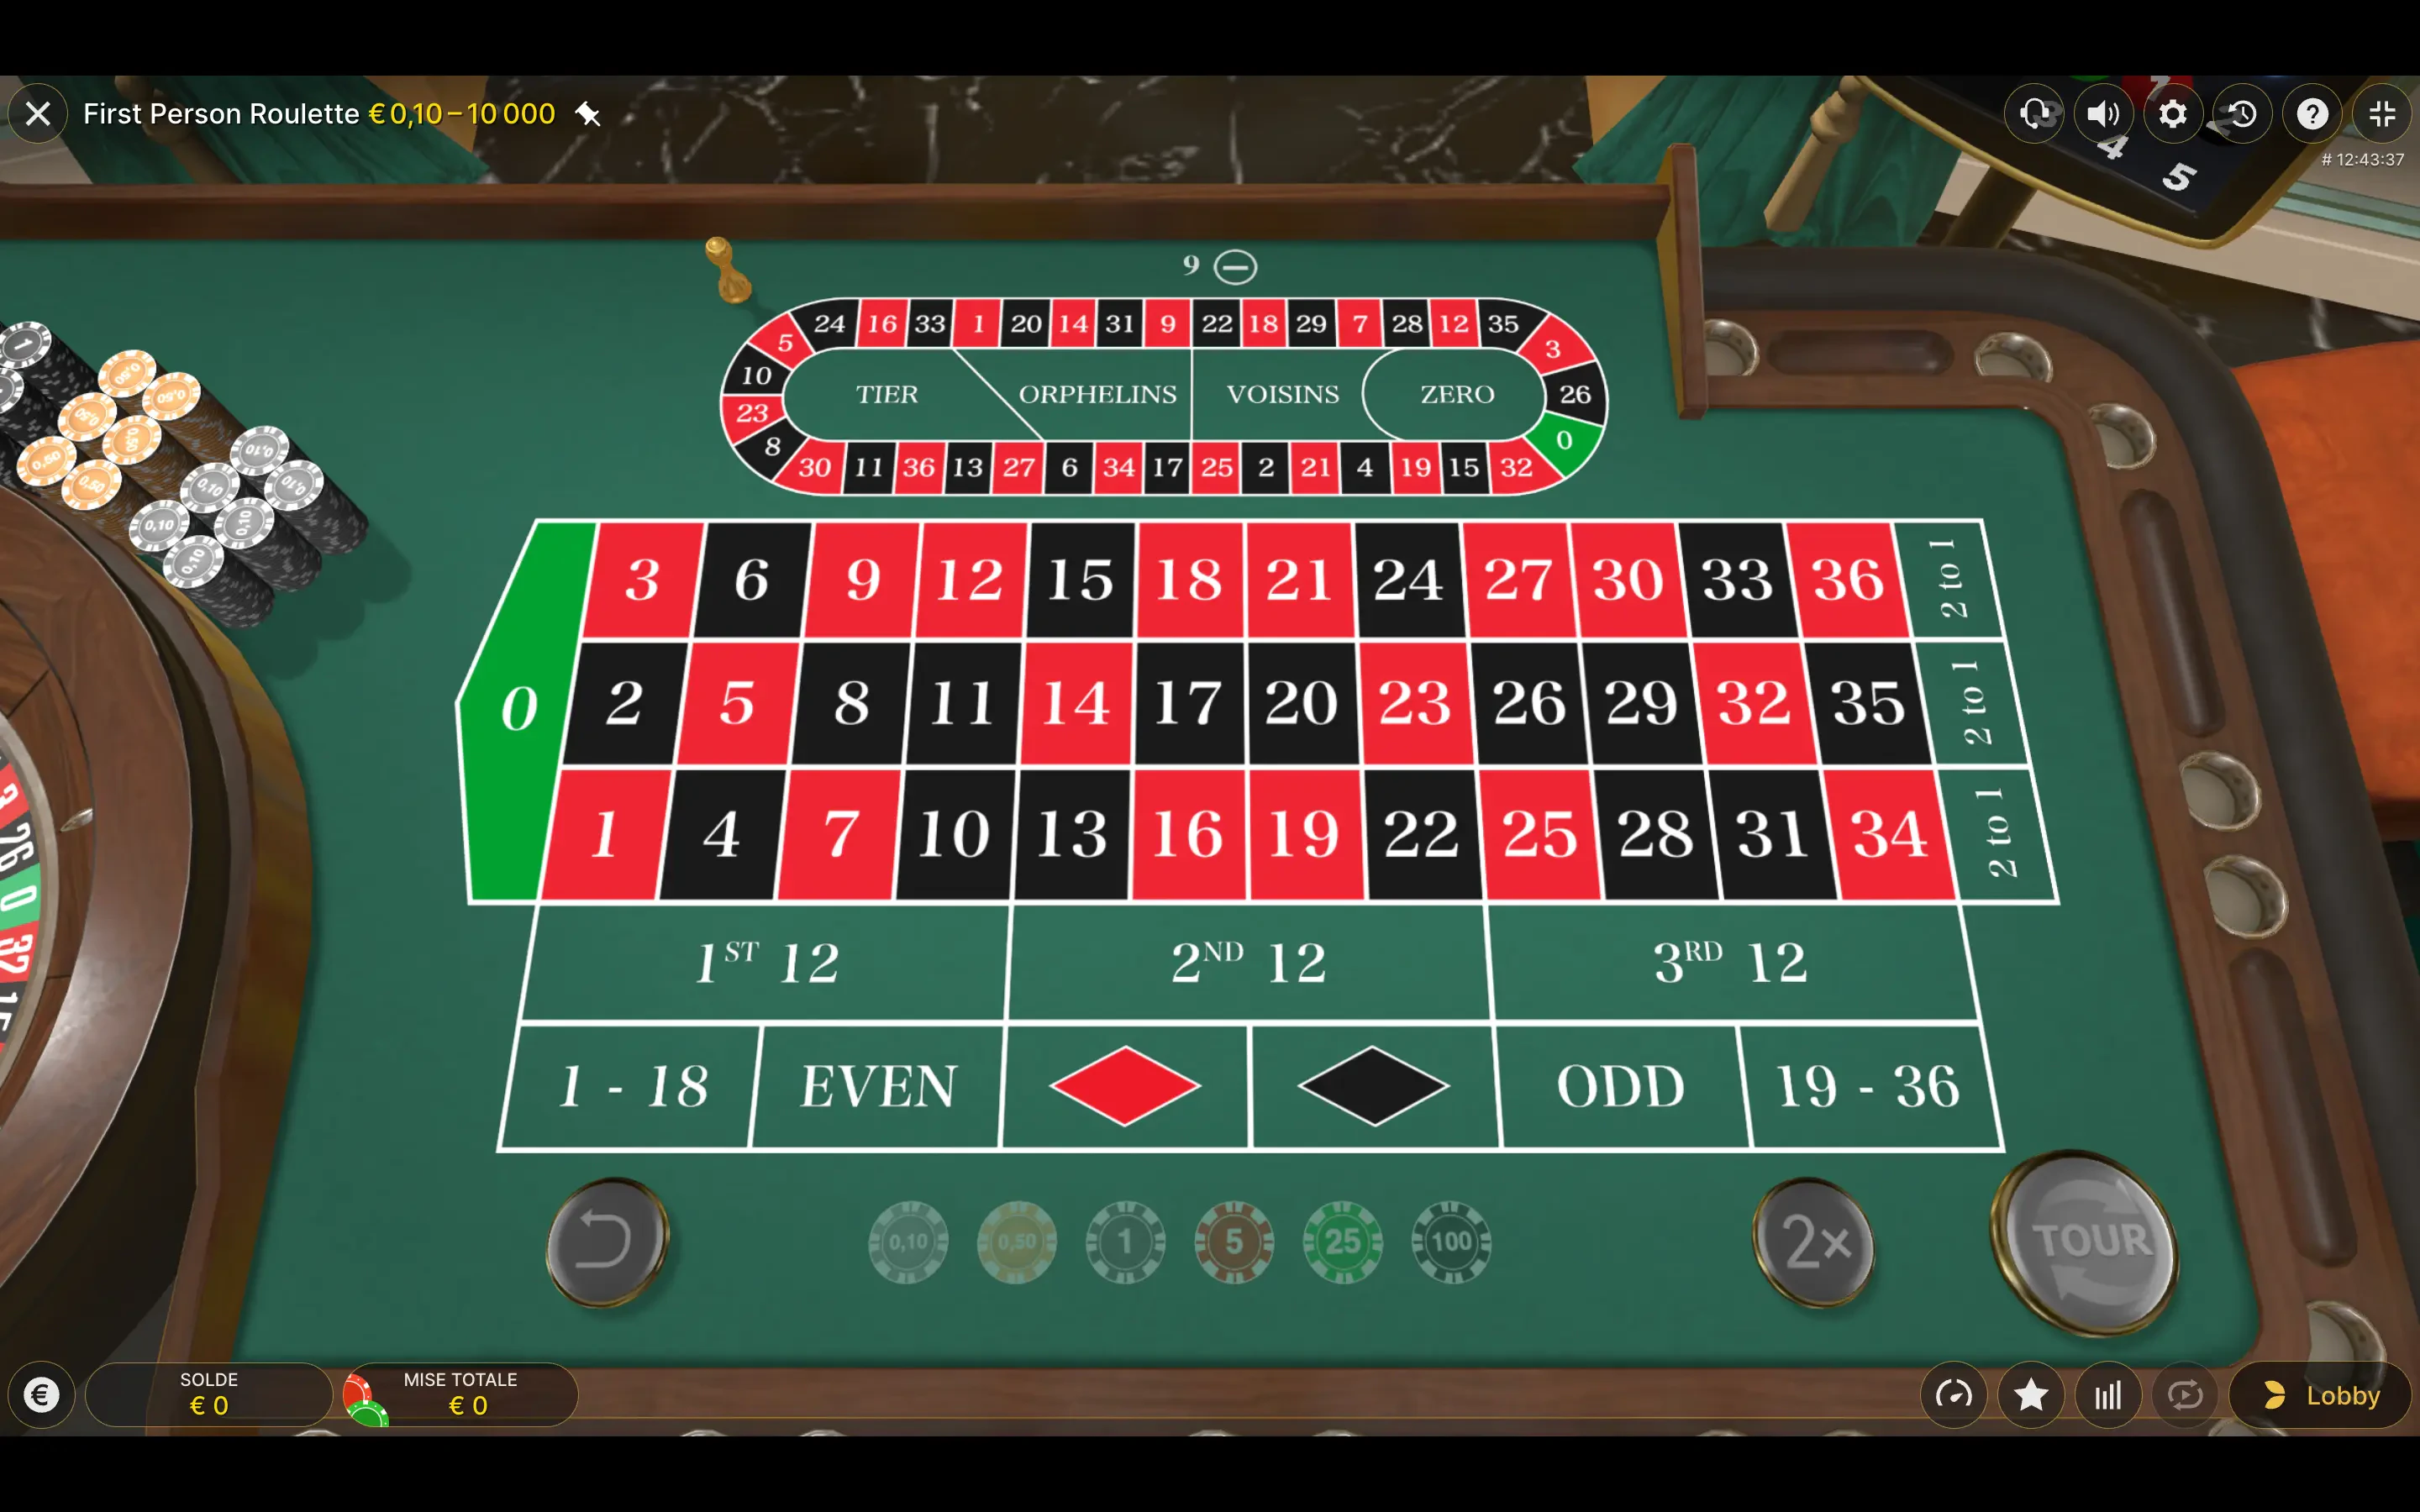 Roulette First Person